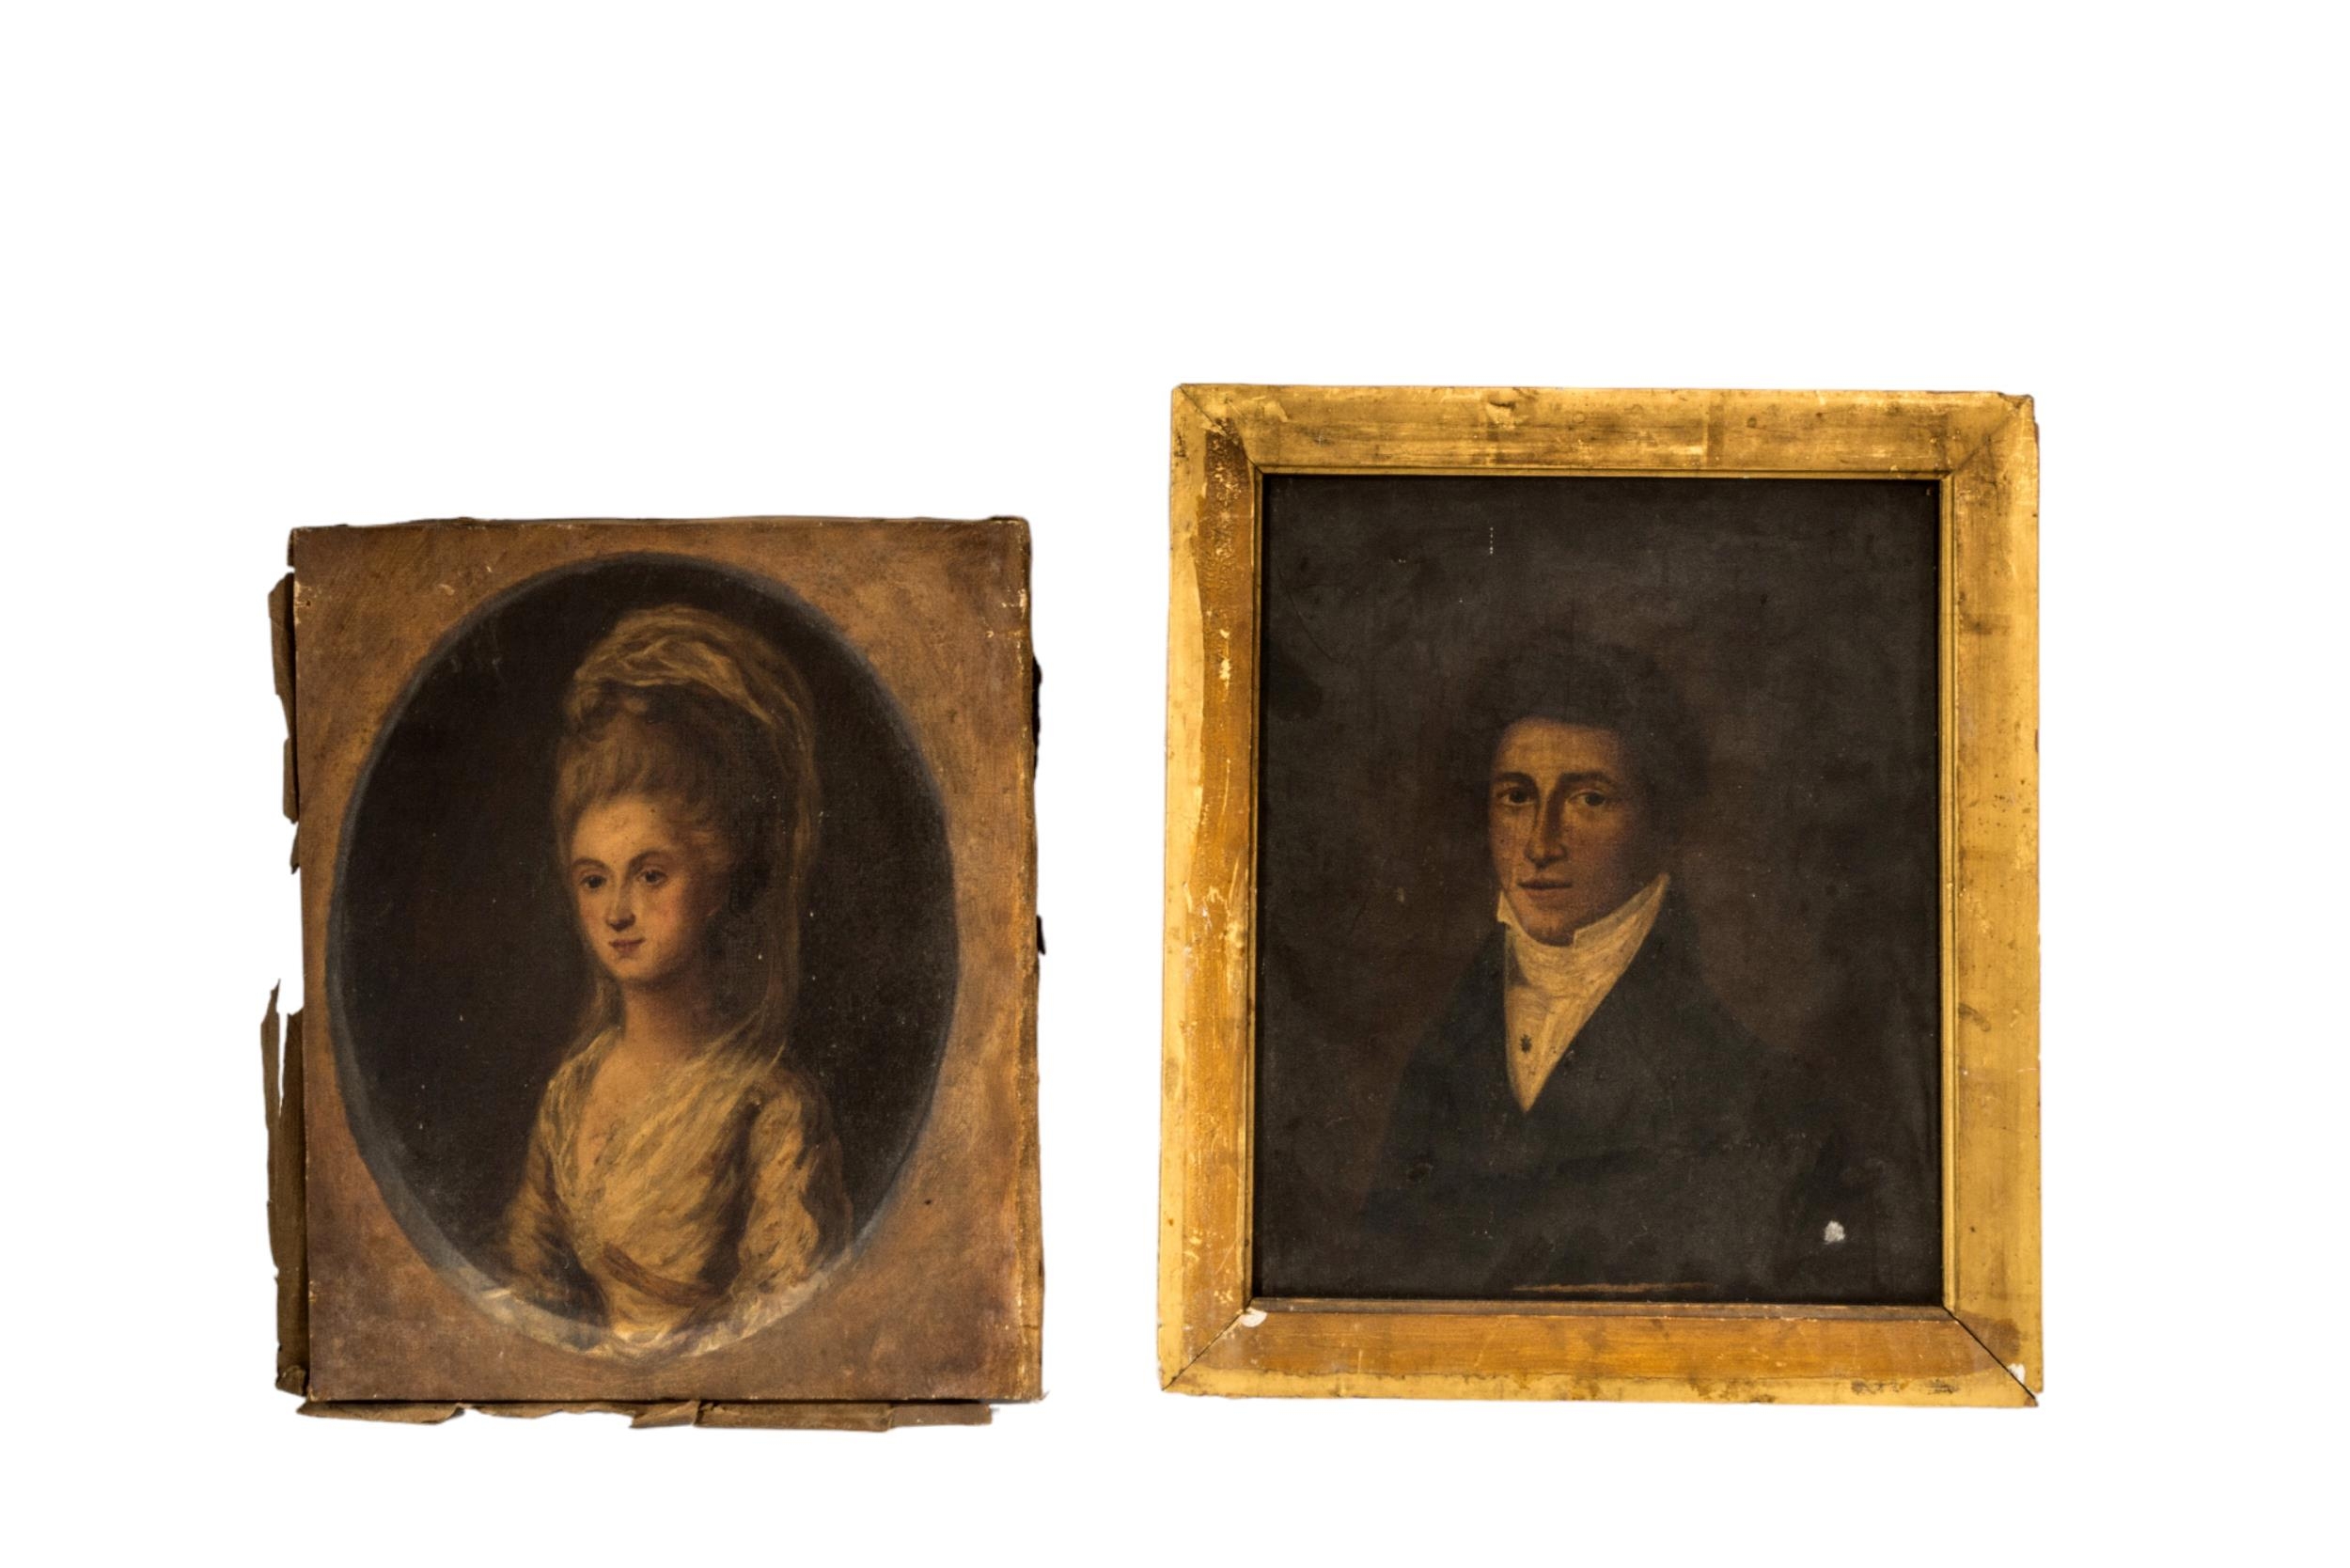 A MIXED GROUP OF FOUR 18TH/19TH CENTURY PORTRAIT OIL PAINTINGS ON CANVAS, featuring a fine - Image 3 of 3